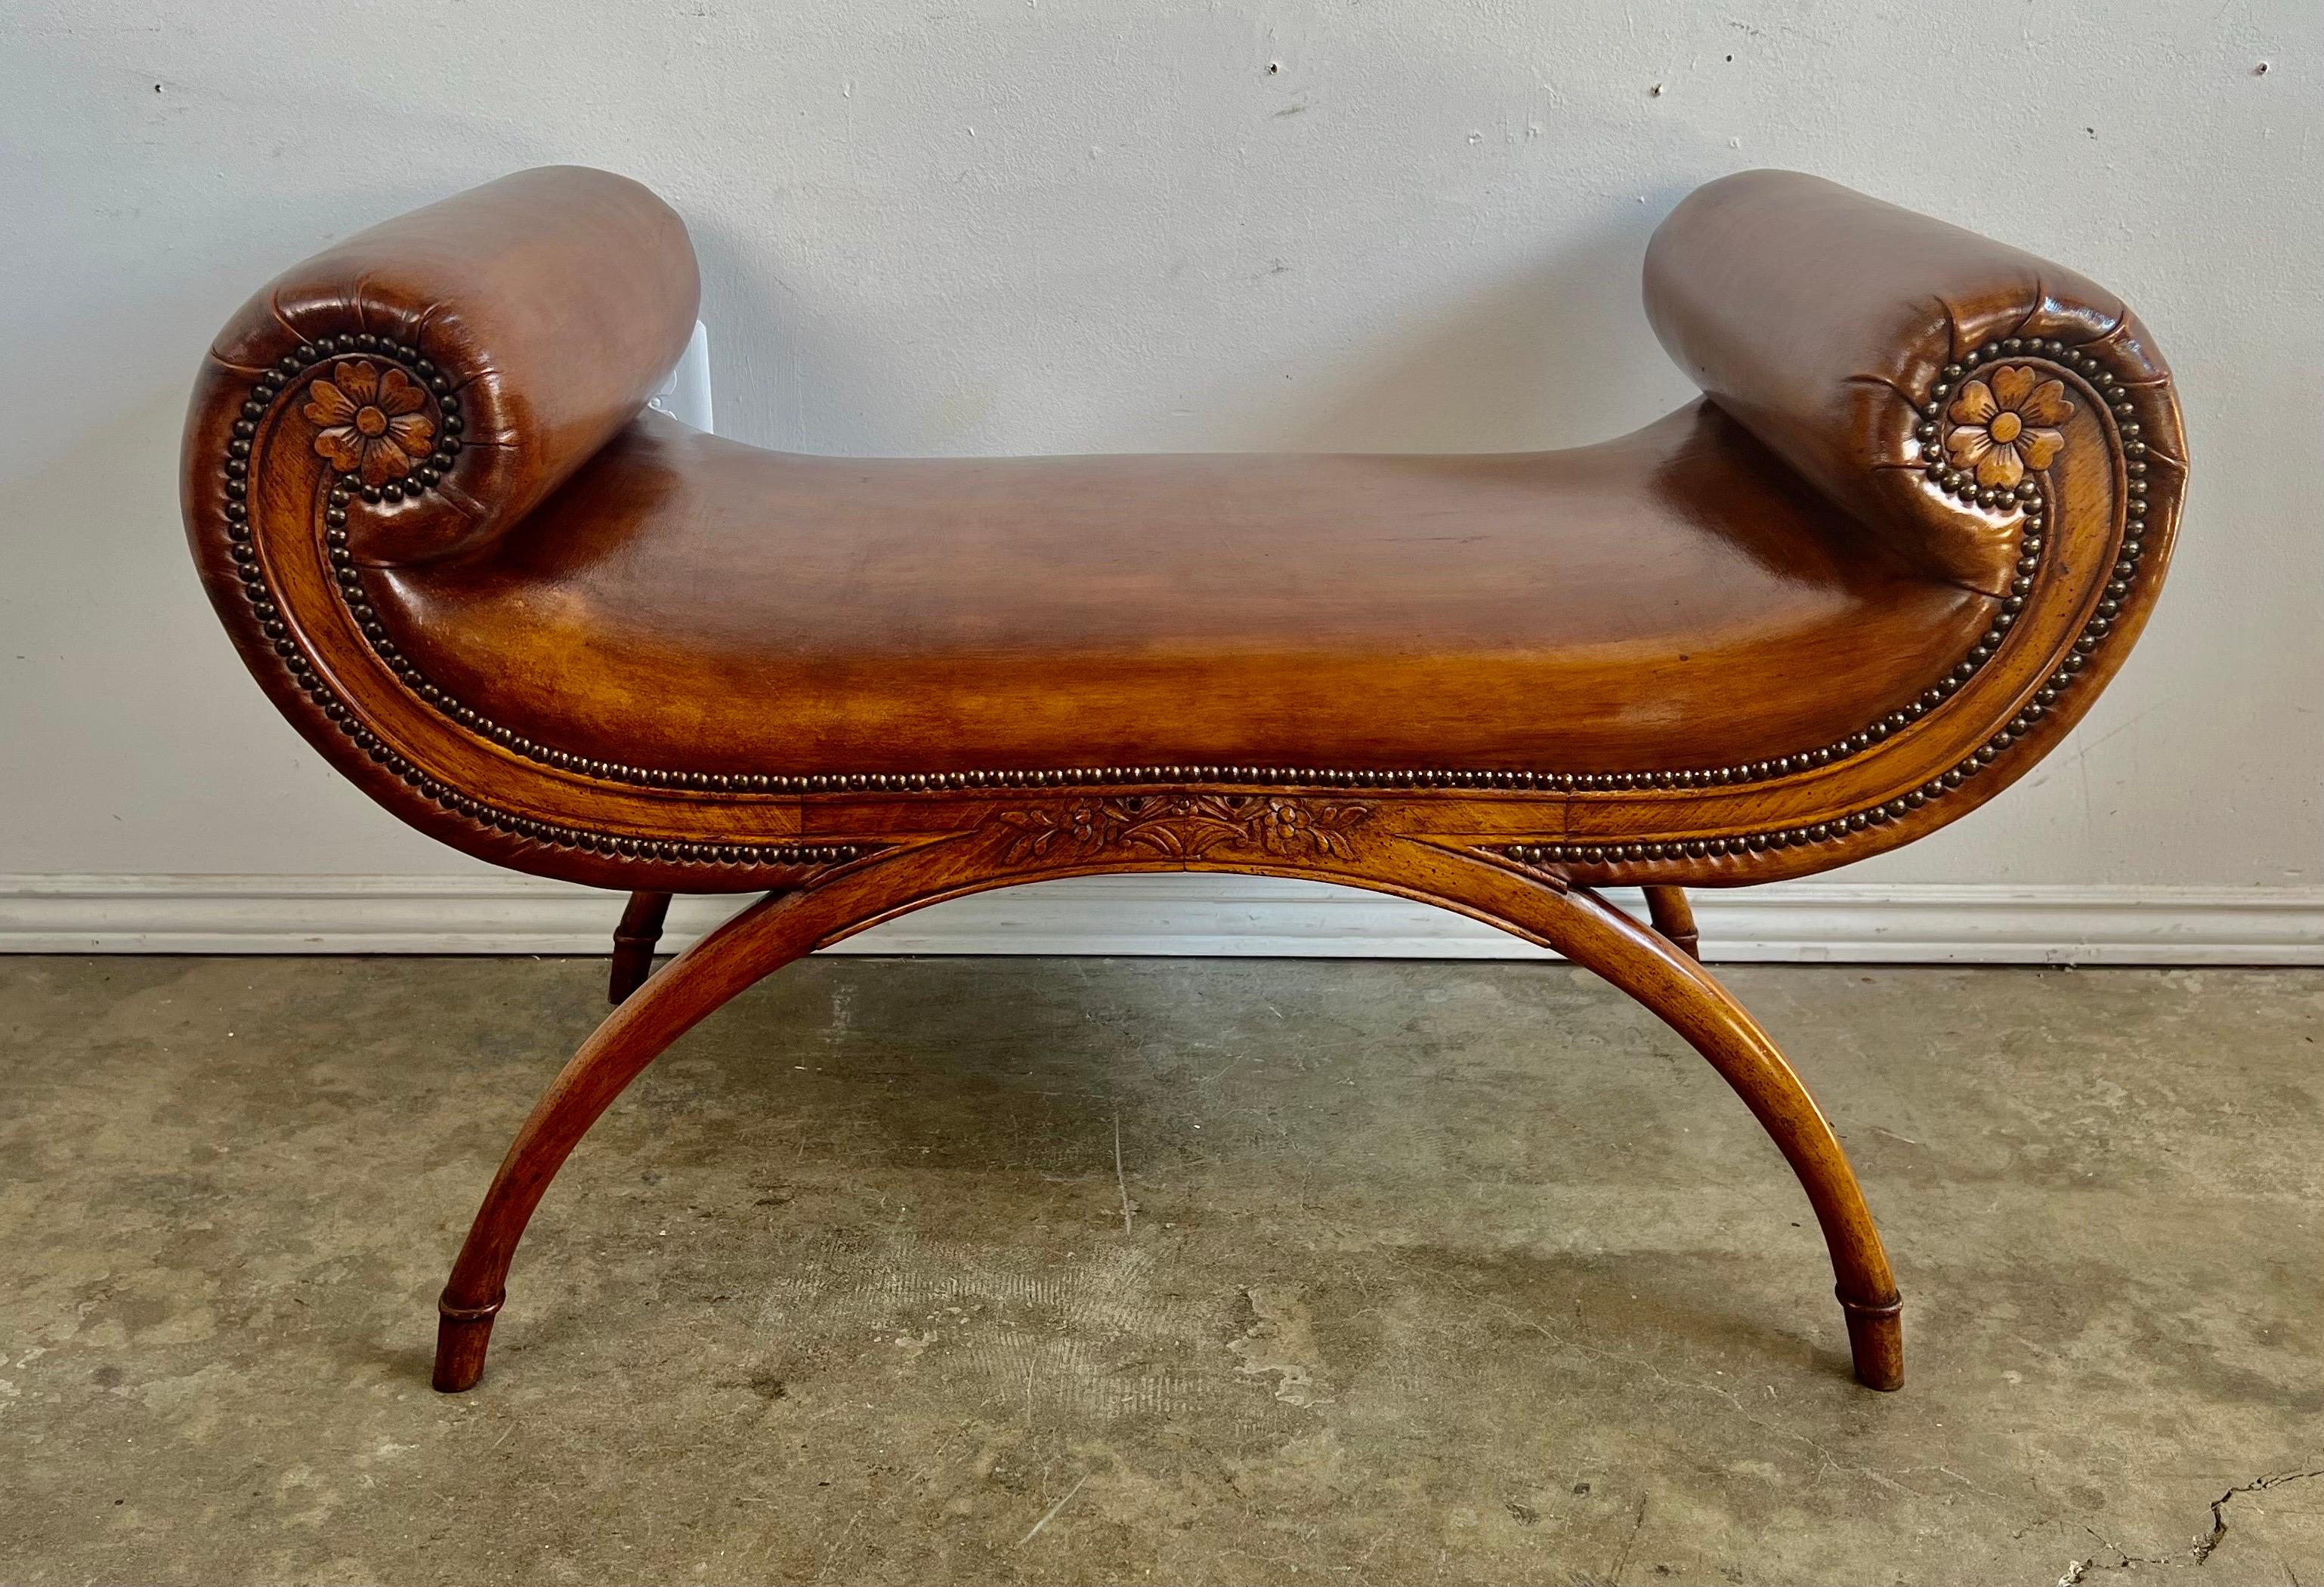 English Regency style walnut carved bench upholstered in a tobacco colored leather with nailhead trim detail. The bench has matching scrolls on both sides that give it beautiful lines. The simple arched legs are perfect with the scrolled arms of the